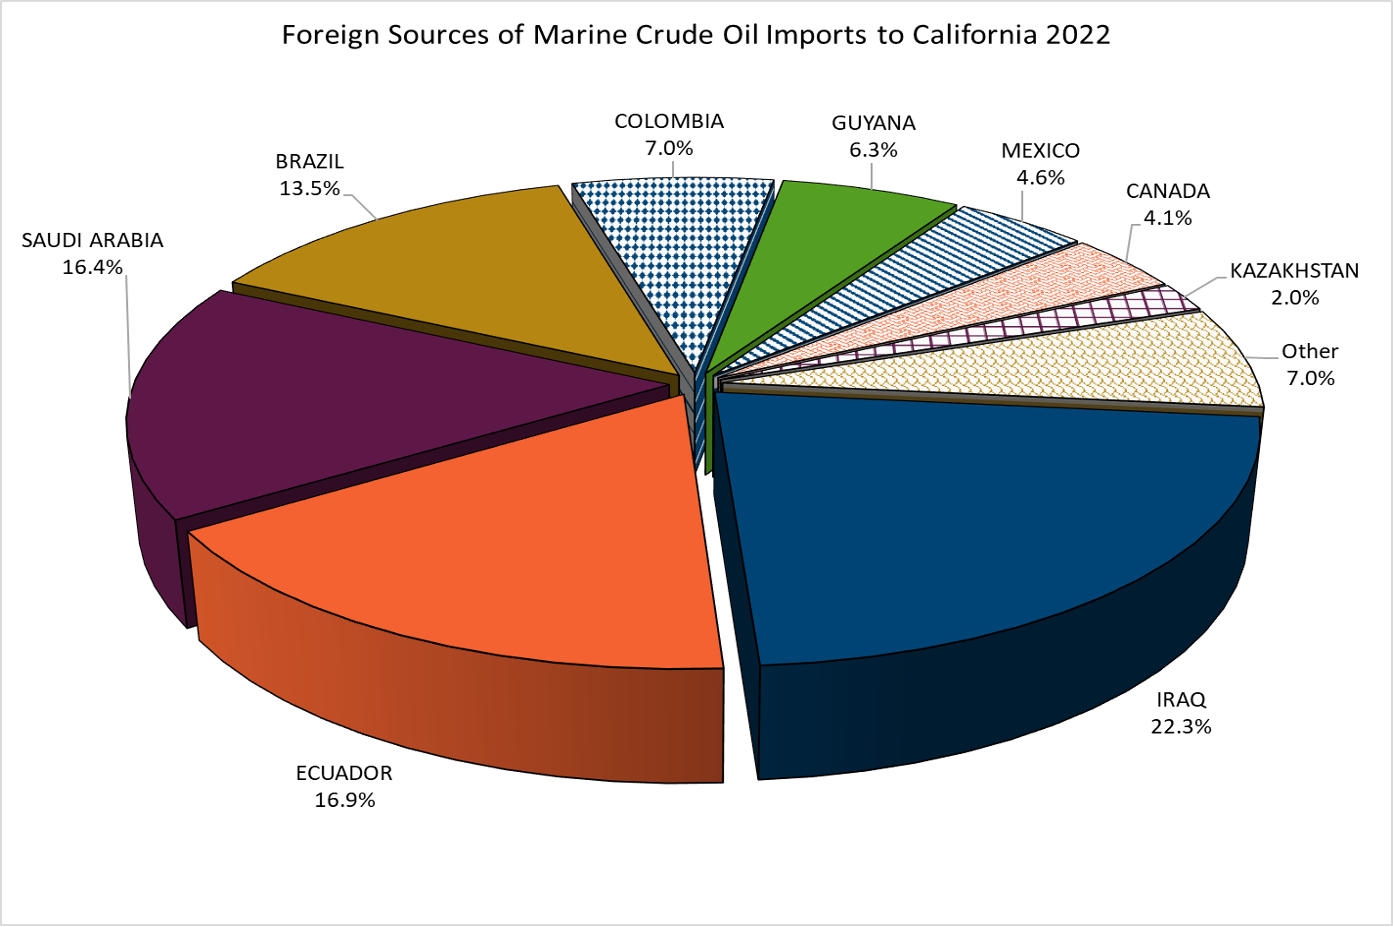 Foreign Sources of Crude Oil Imports to California 2022